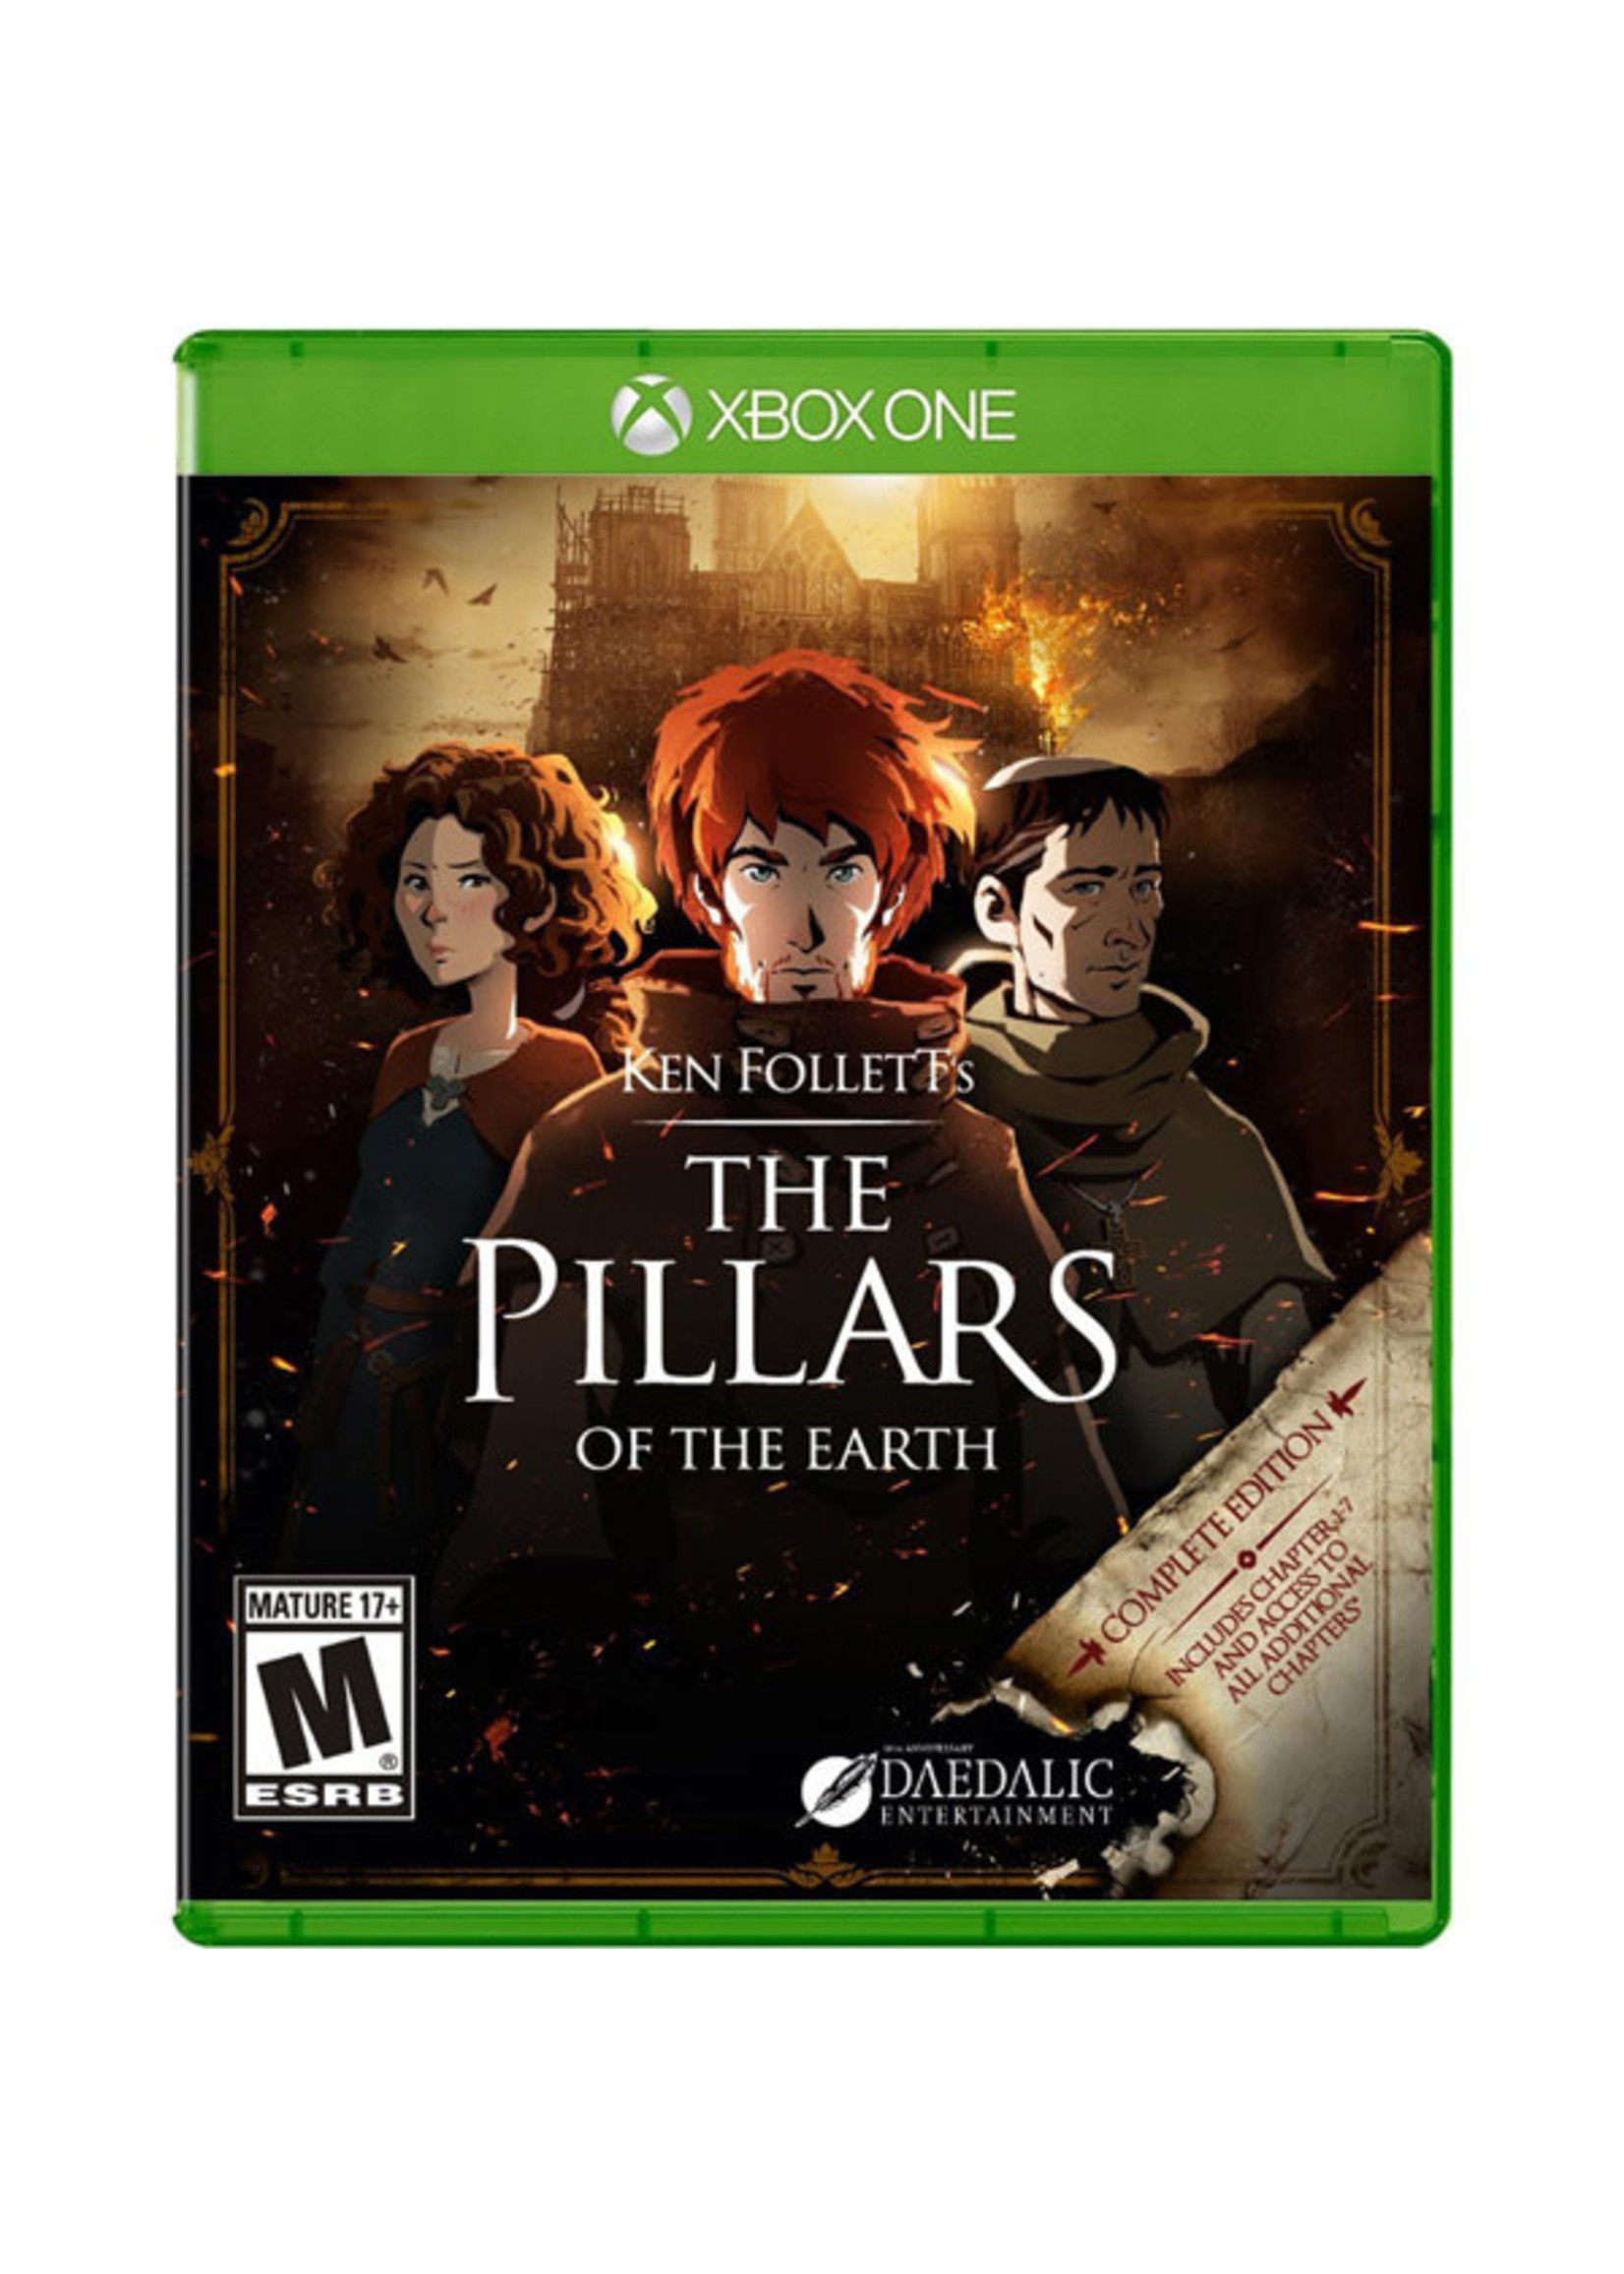 PILLARS OF THE EARTH XBOX ONE